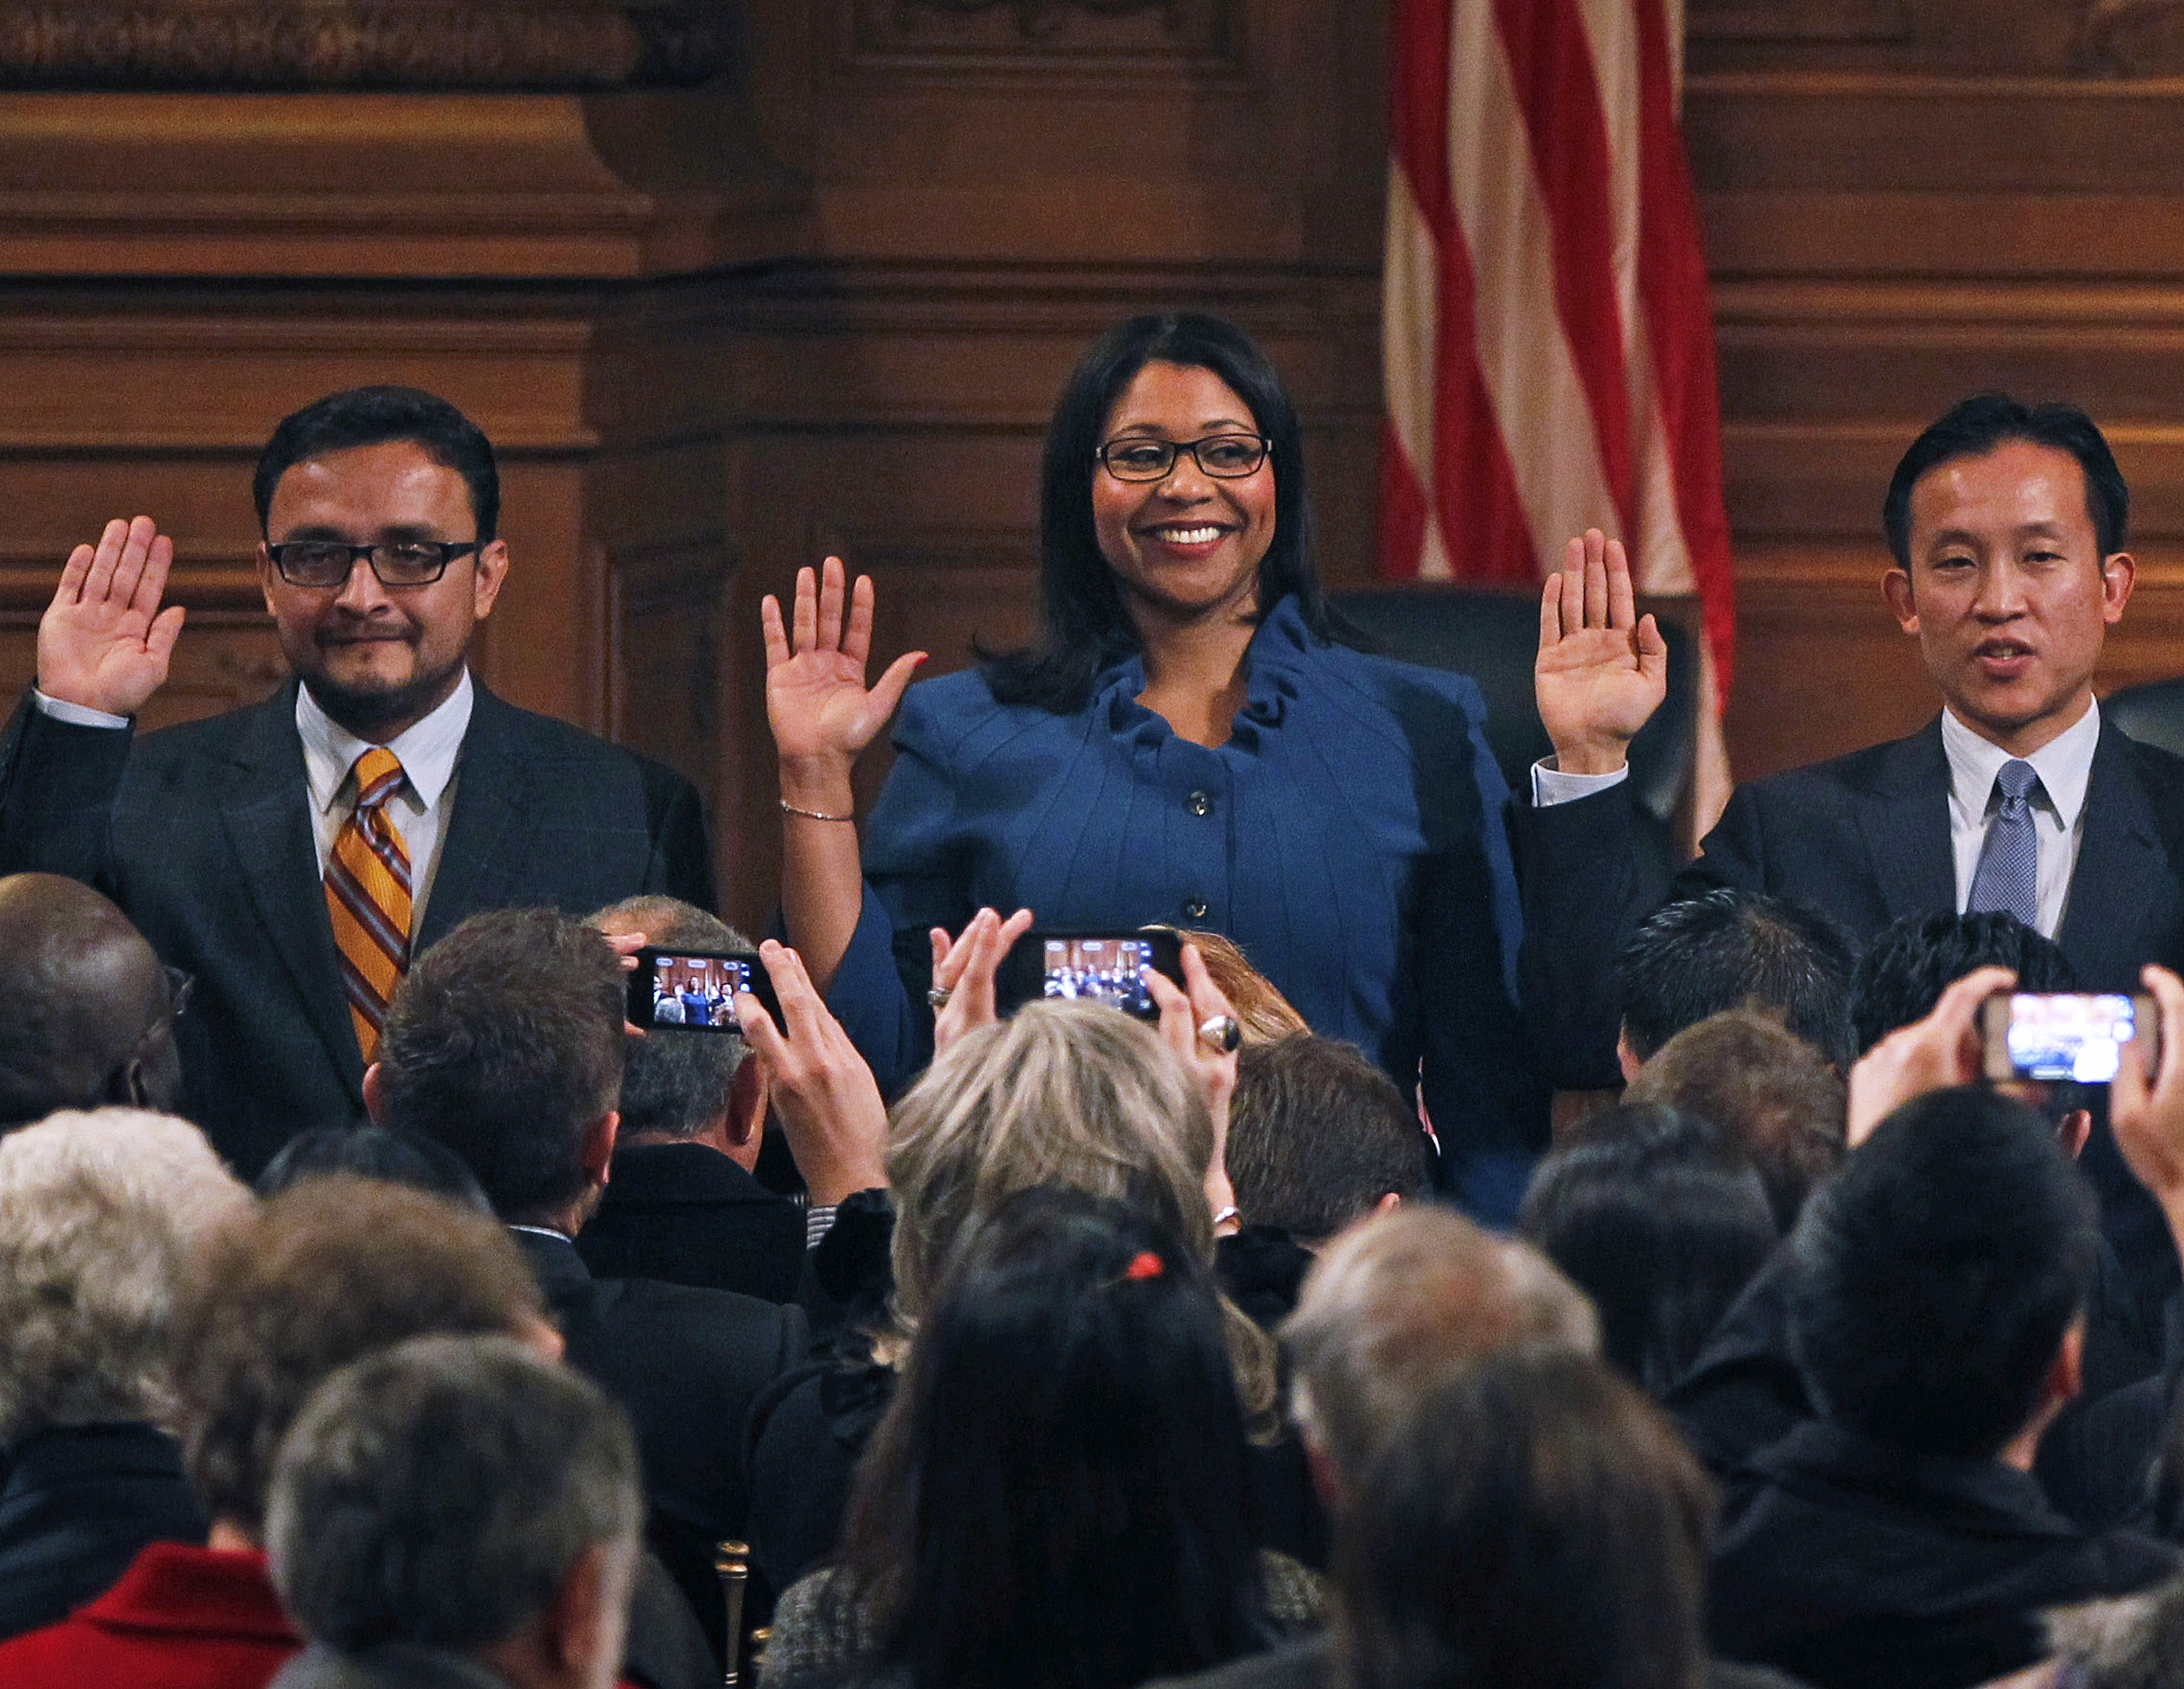 David Campos, London Breed and David Chiu (from left to right) take the oath of office during the supervisors' swearing-in ceremony at San Francisco City Hall on Jan. 8, 2013.